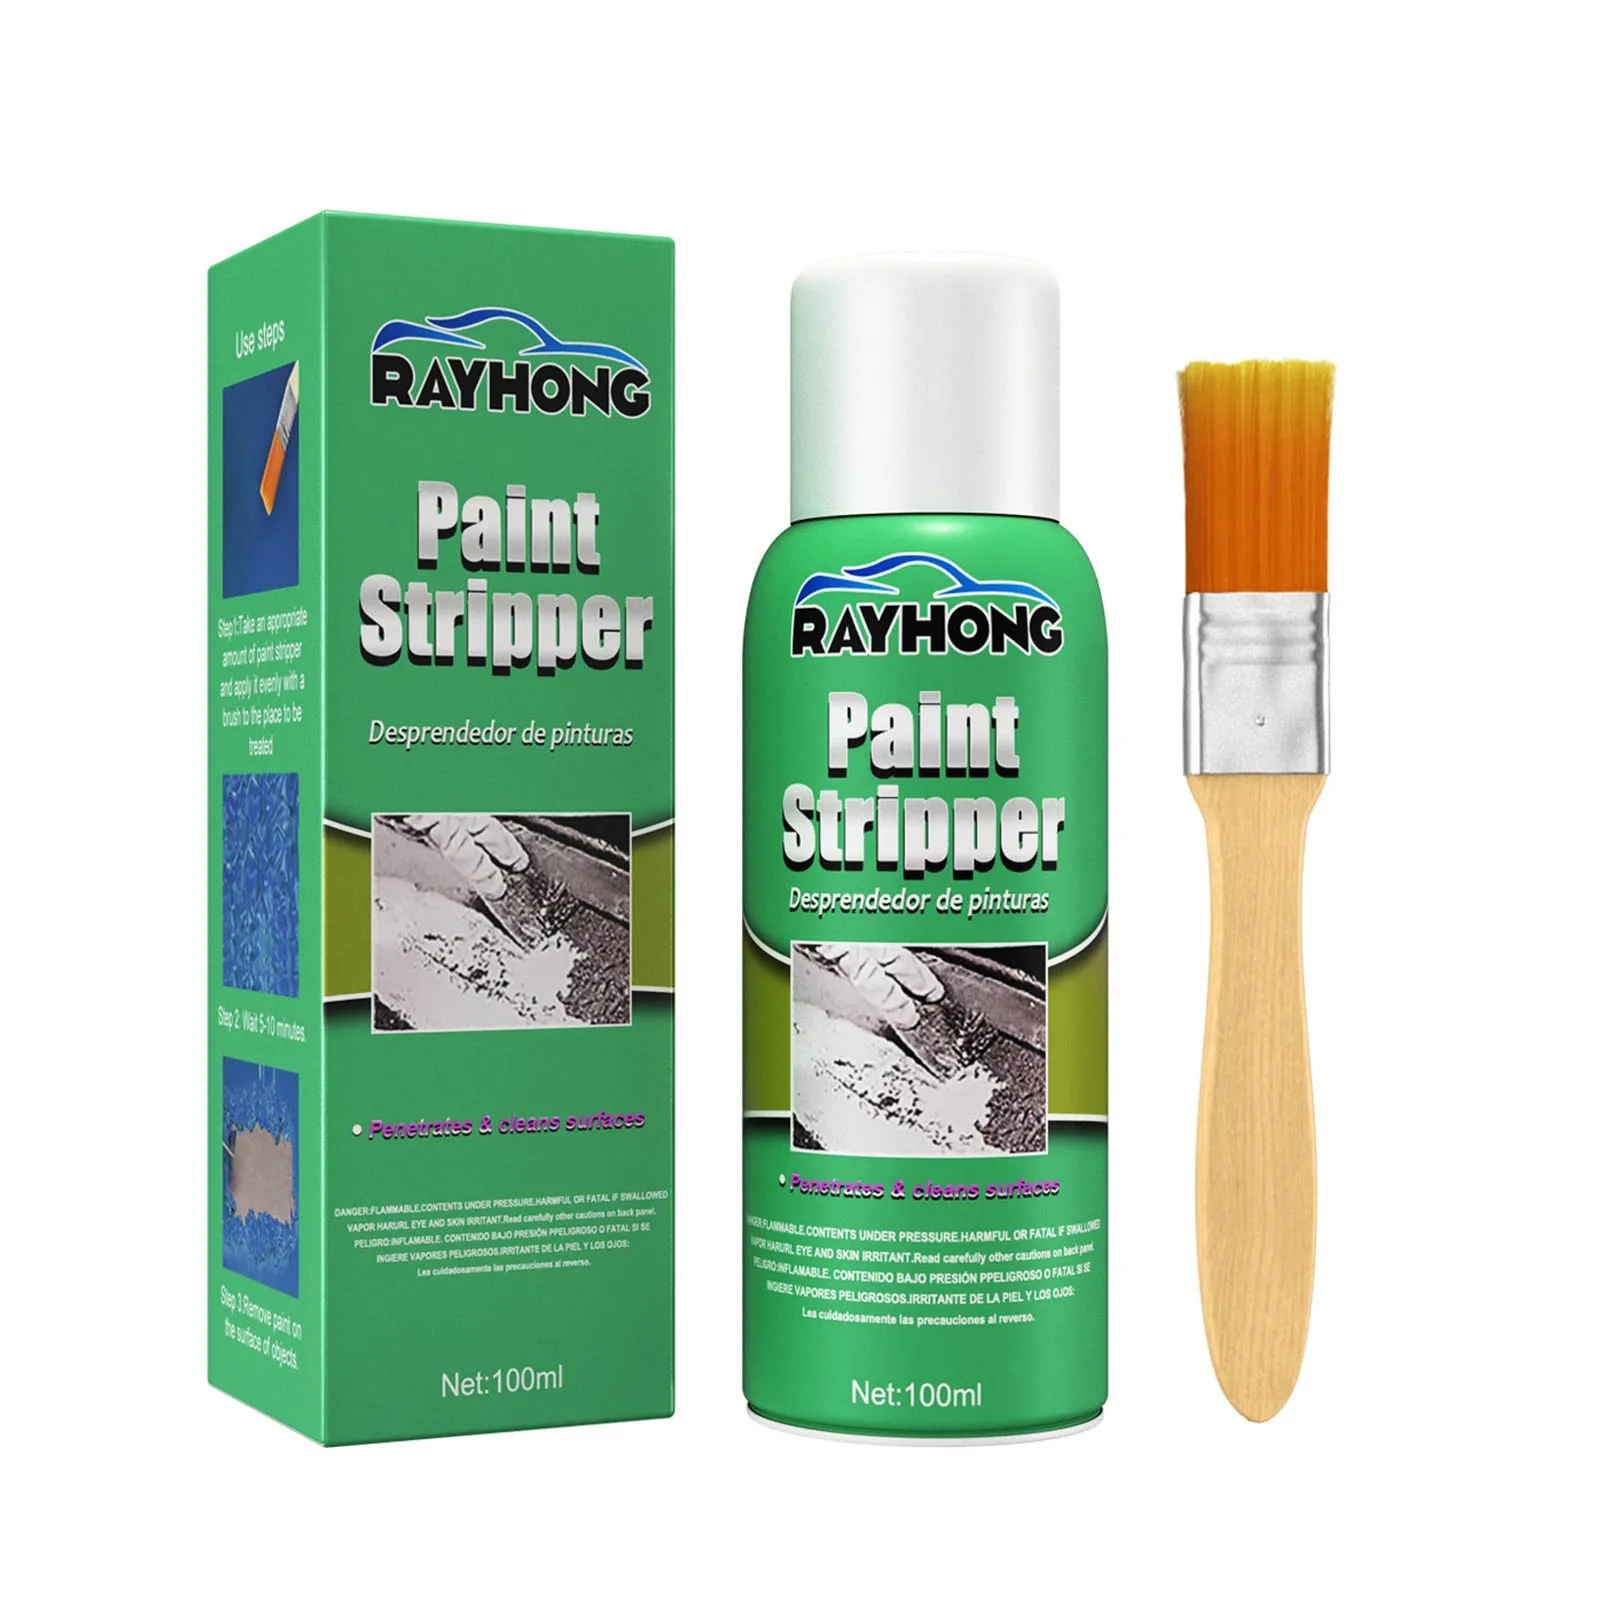 100ml Car Paint Stripper Strong Paint Removal Spray+Brush Tool Car Paint Maintenance Set Paint Removal Care Repair Accessories black car wax